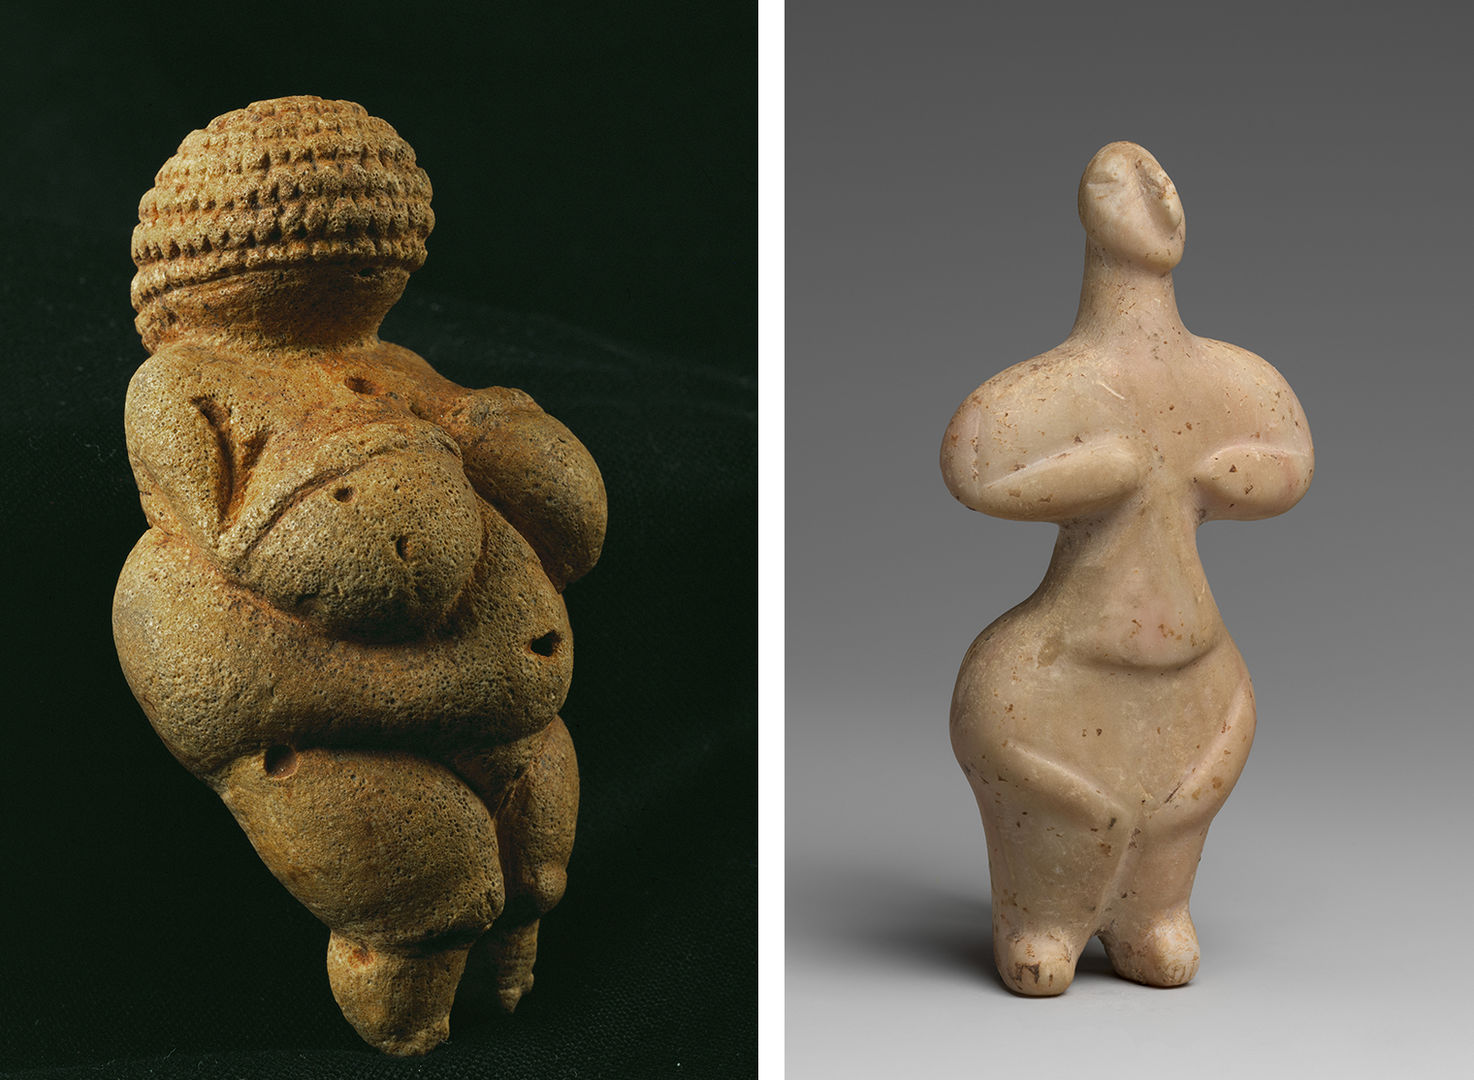 Image of a large famous stone statue of an earth goddess to the right and a small statue of a female Cycladic figure with her hips out. 